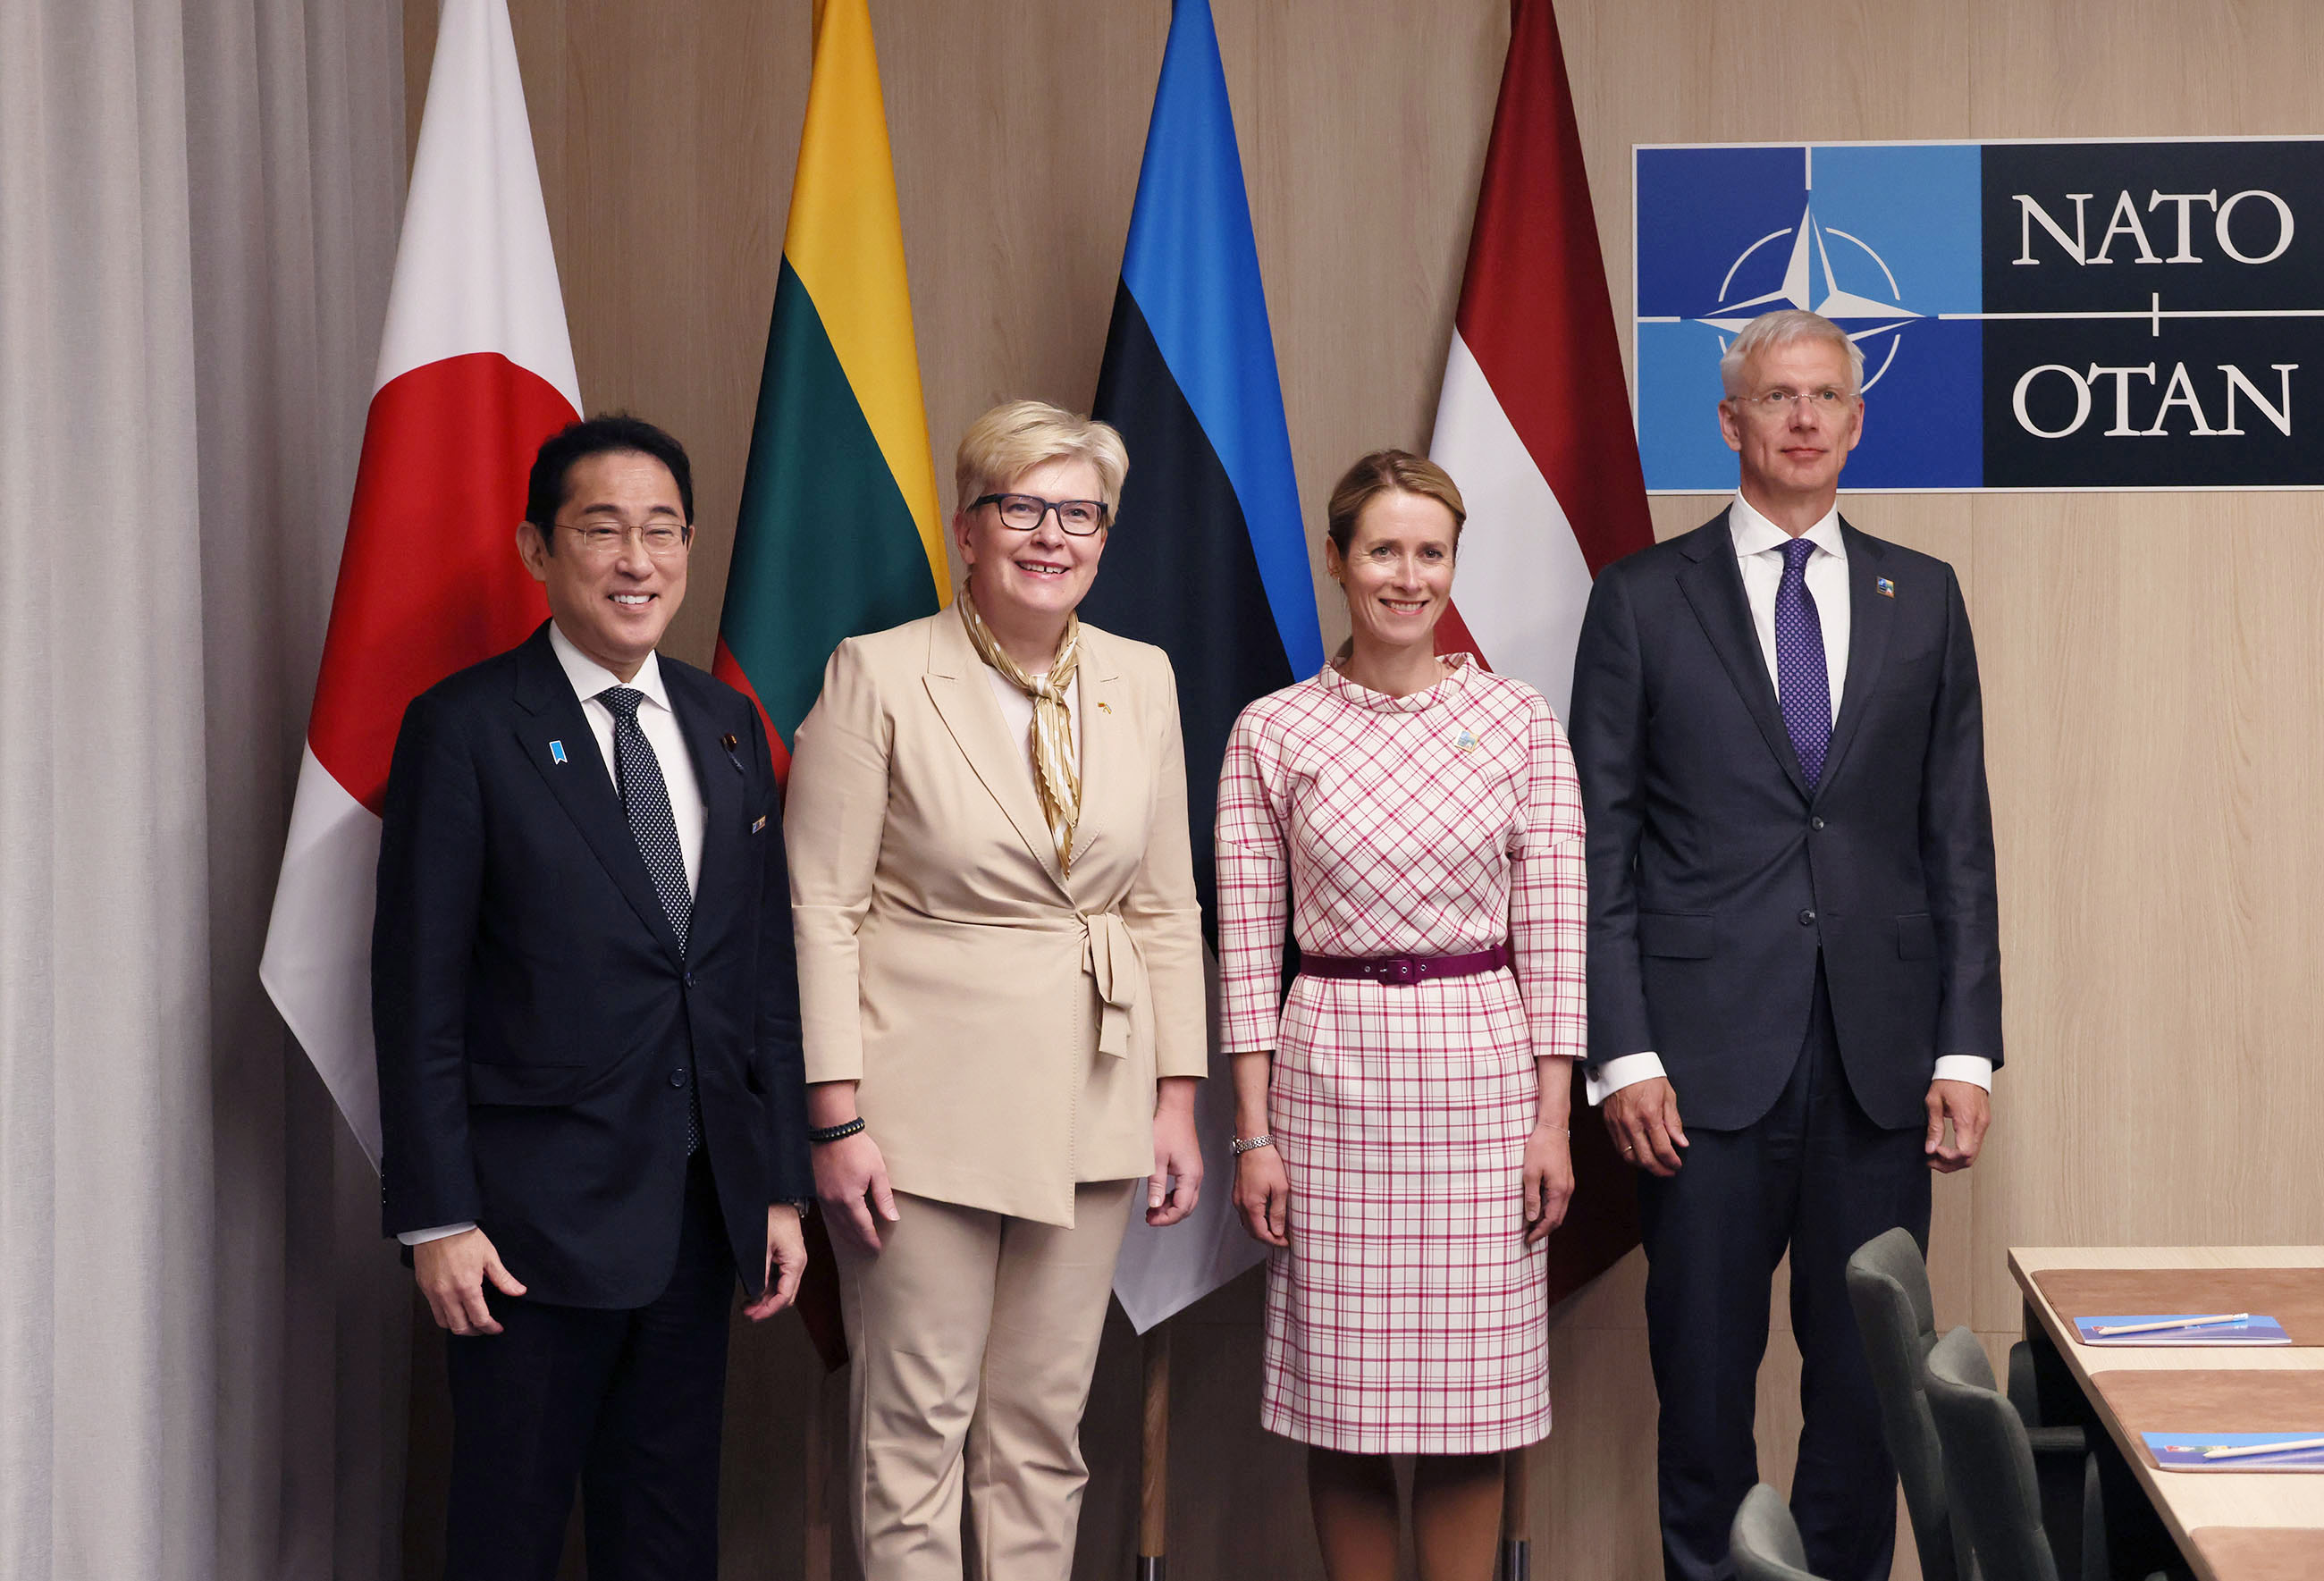 Informal talks with Prime Ministers of Estonia, Latvia and Lithuania